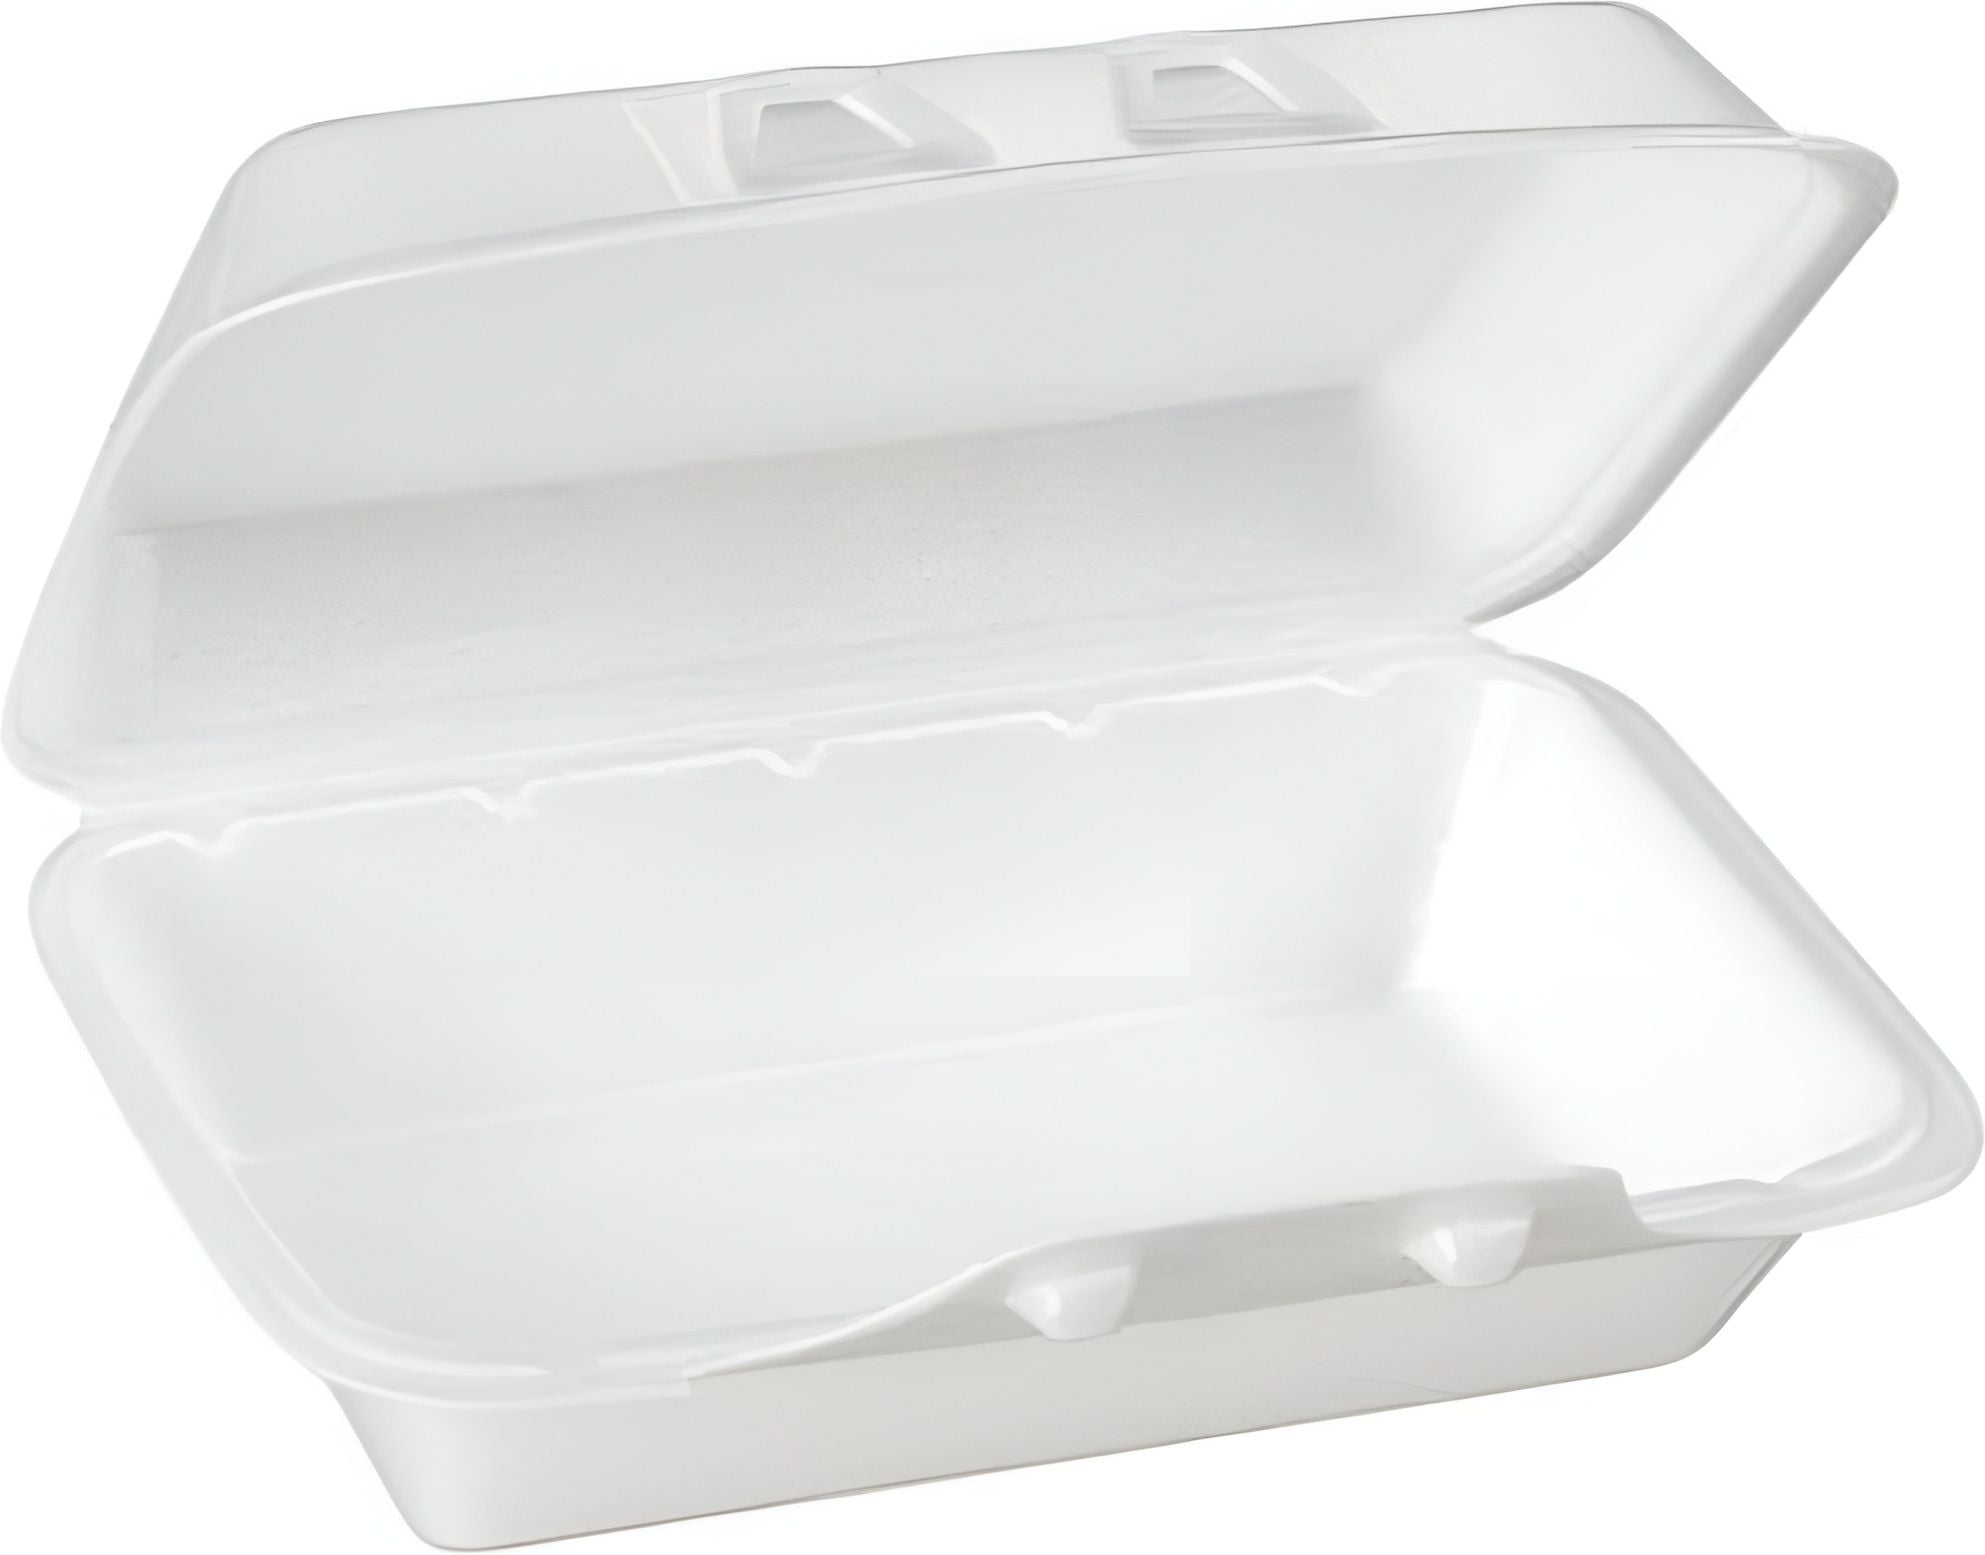 CKF Inc. - 9.5 x 10 x 3", FST6 Large White Foam Hinged Container, 200/cs - 87518